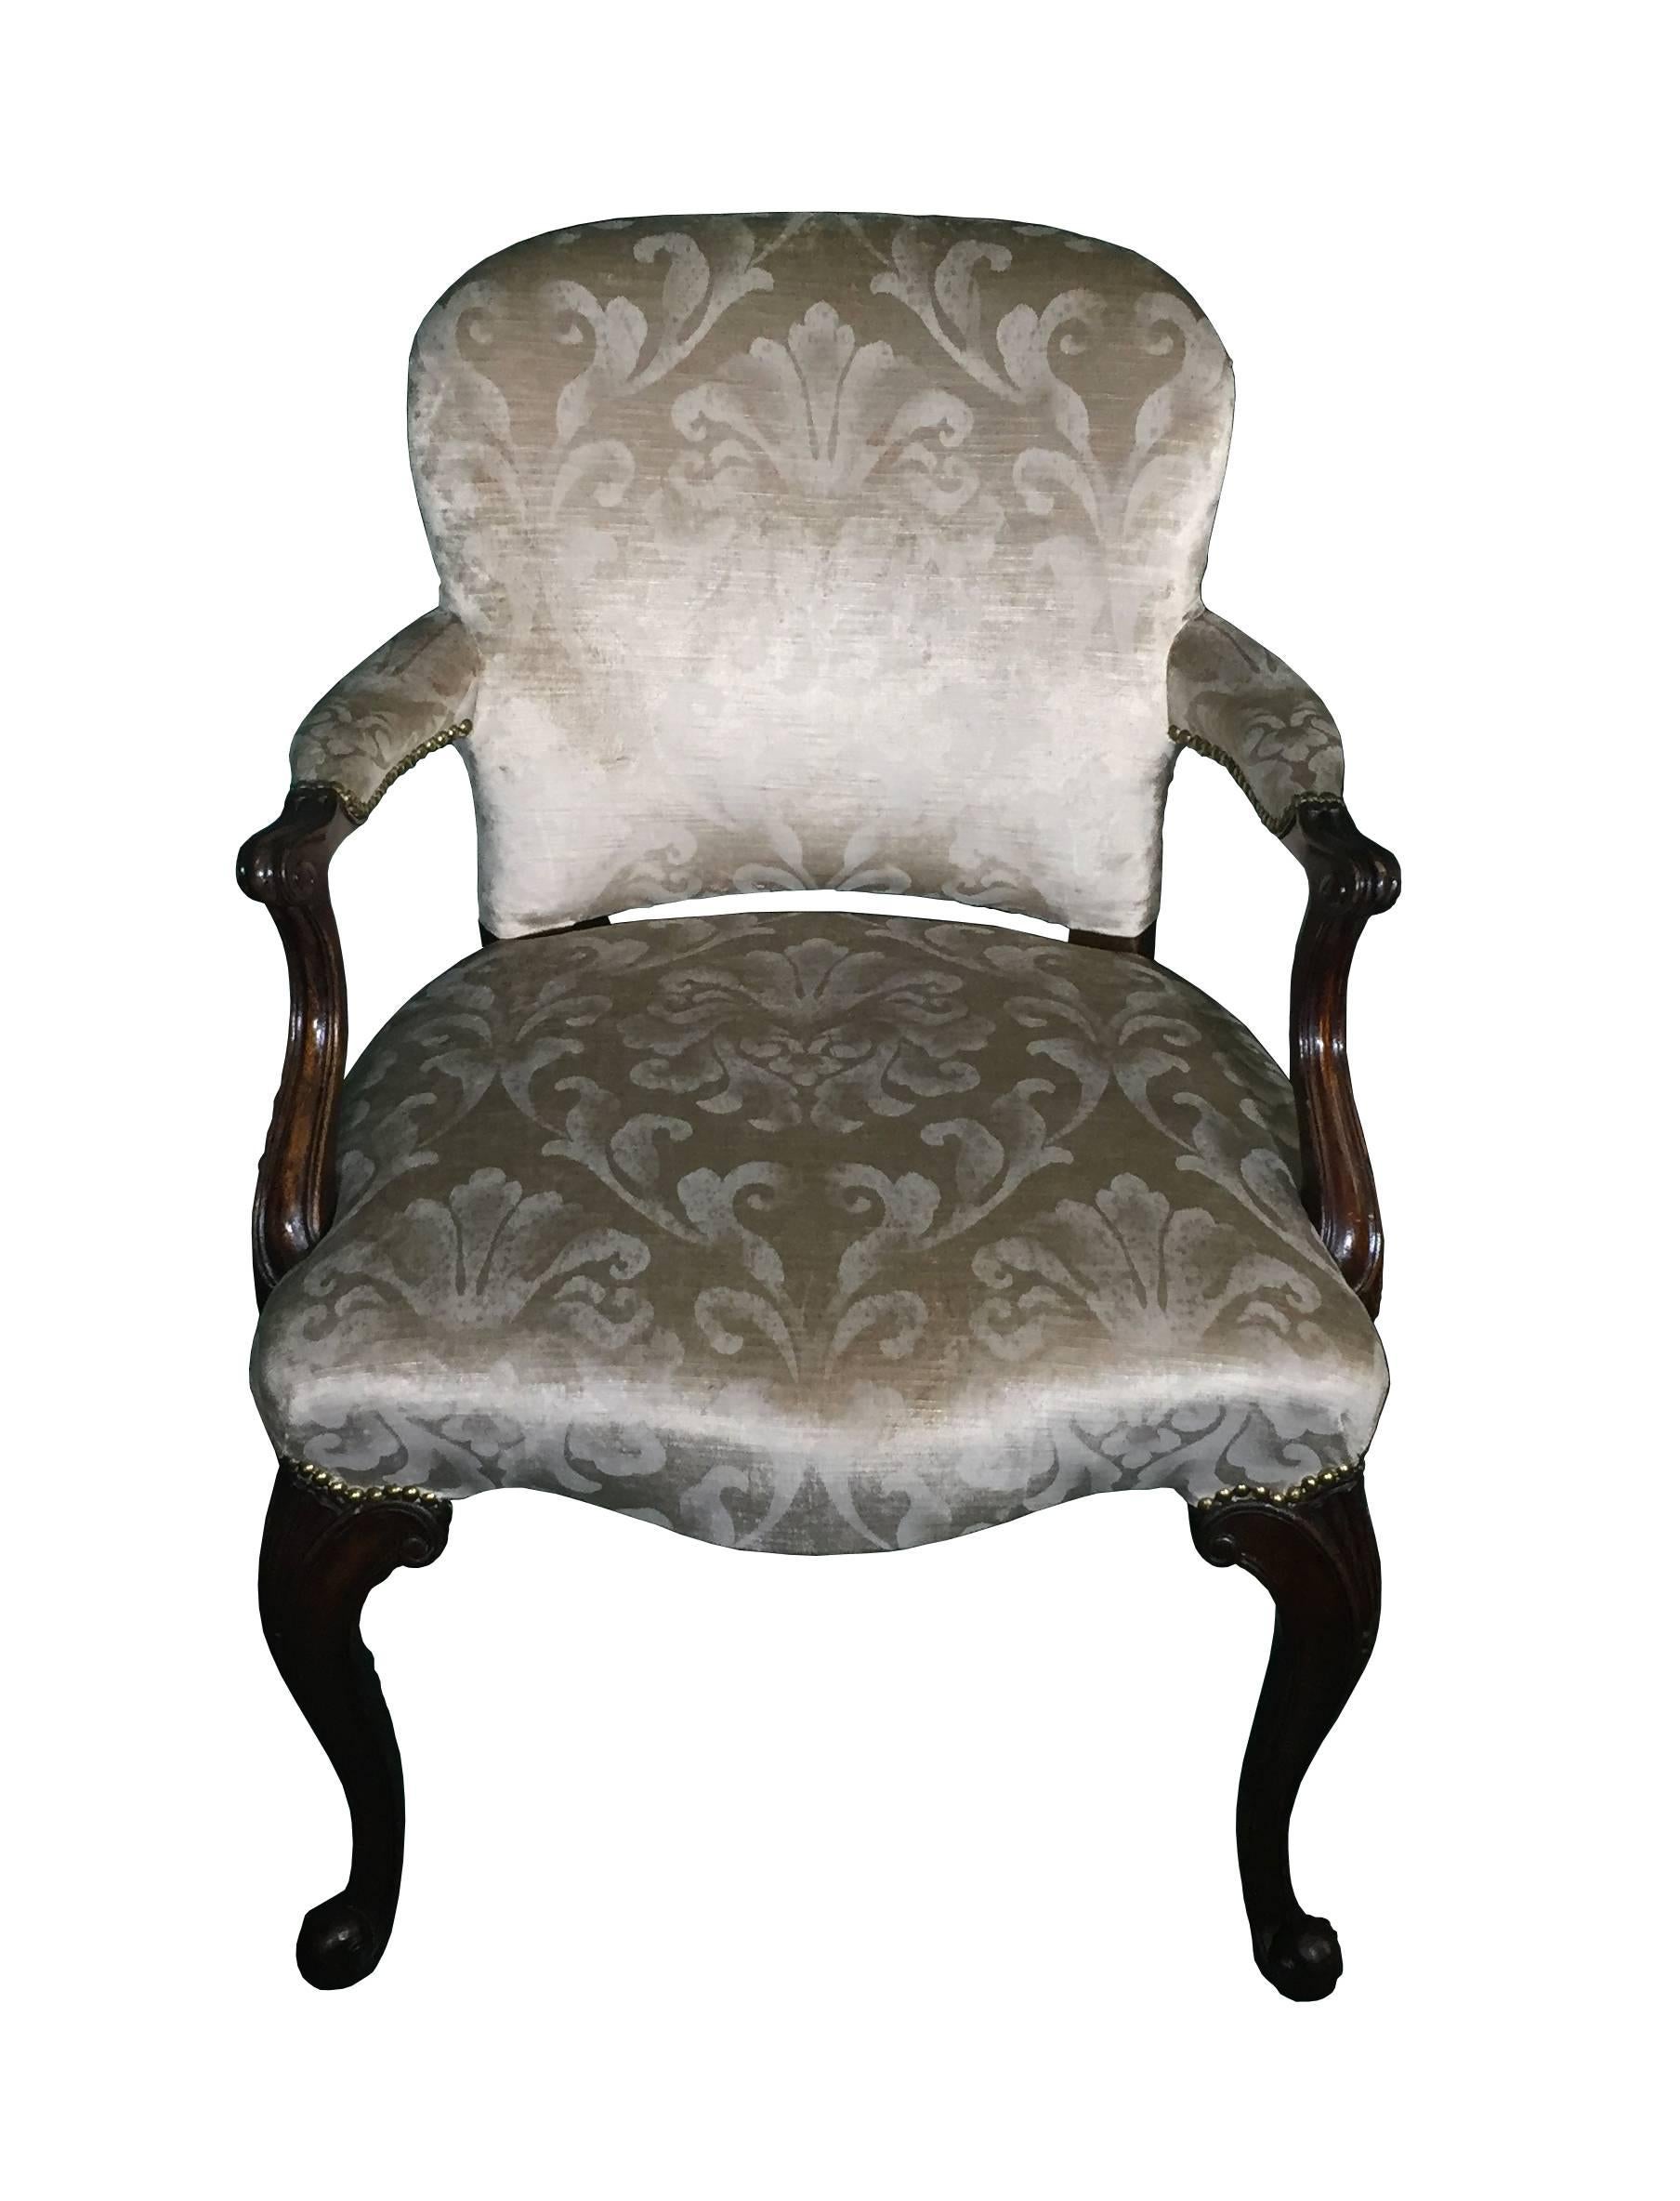 Antique mahogany chairs Chippendale revival with beautifully scrolled shaped and fluted arms. These chairs have been recently re-upholstered in a floral velvet damask. The seat of serpentine shape, raised upon carved cabriole legs with shell motif,